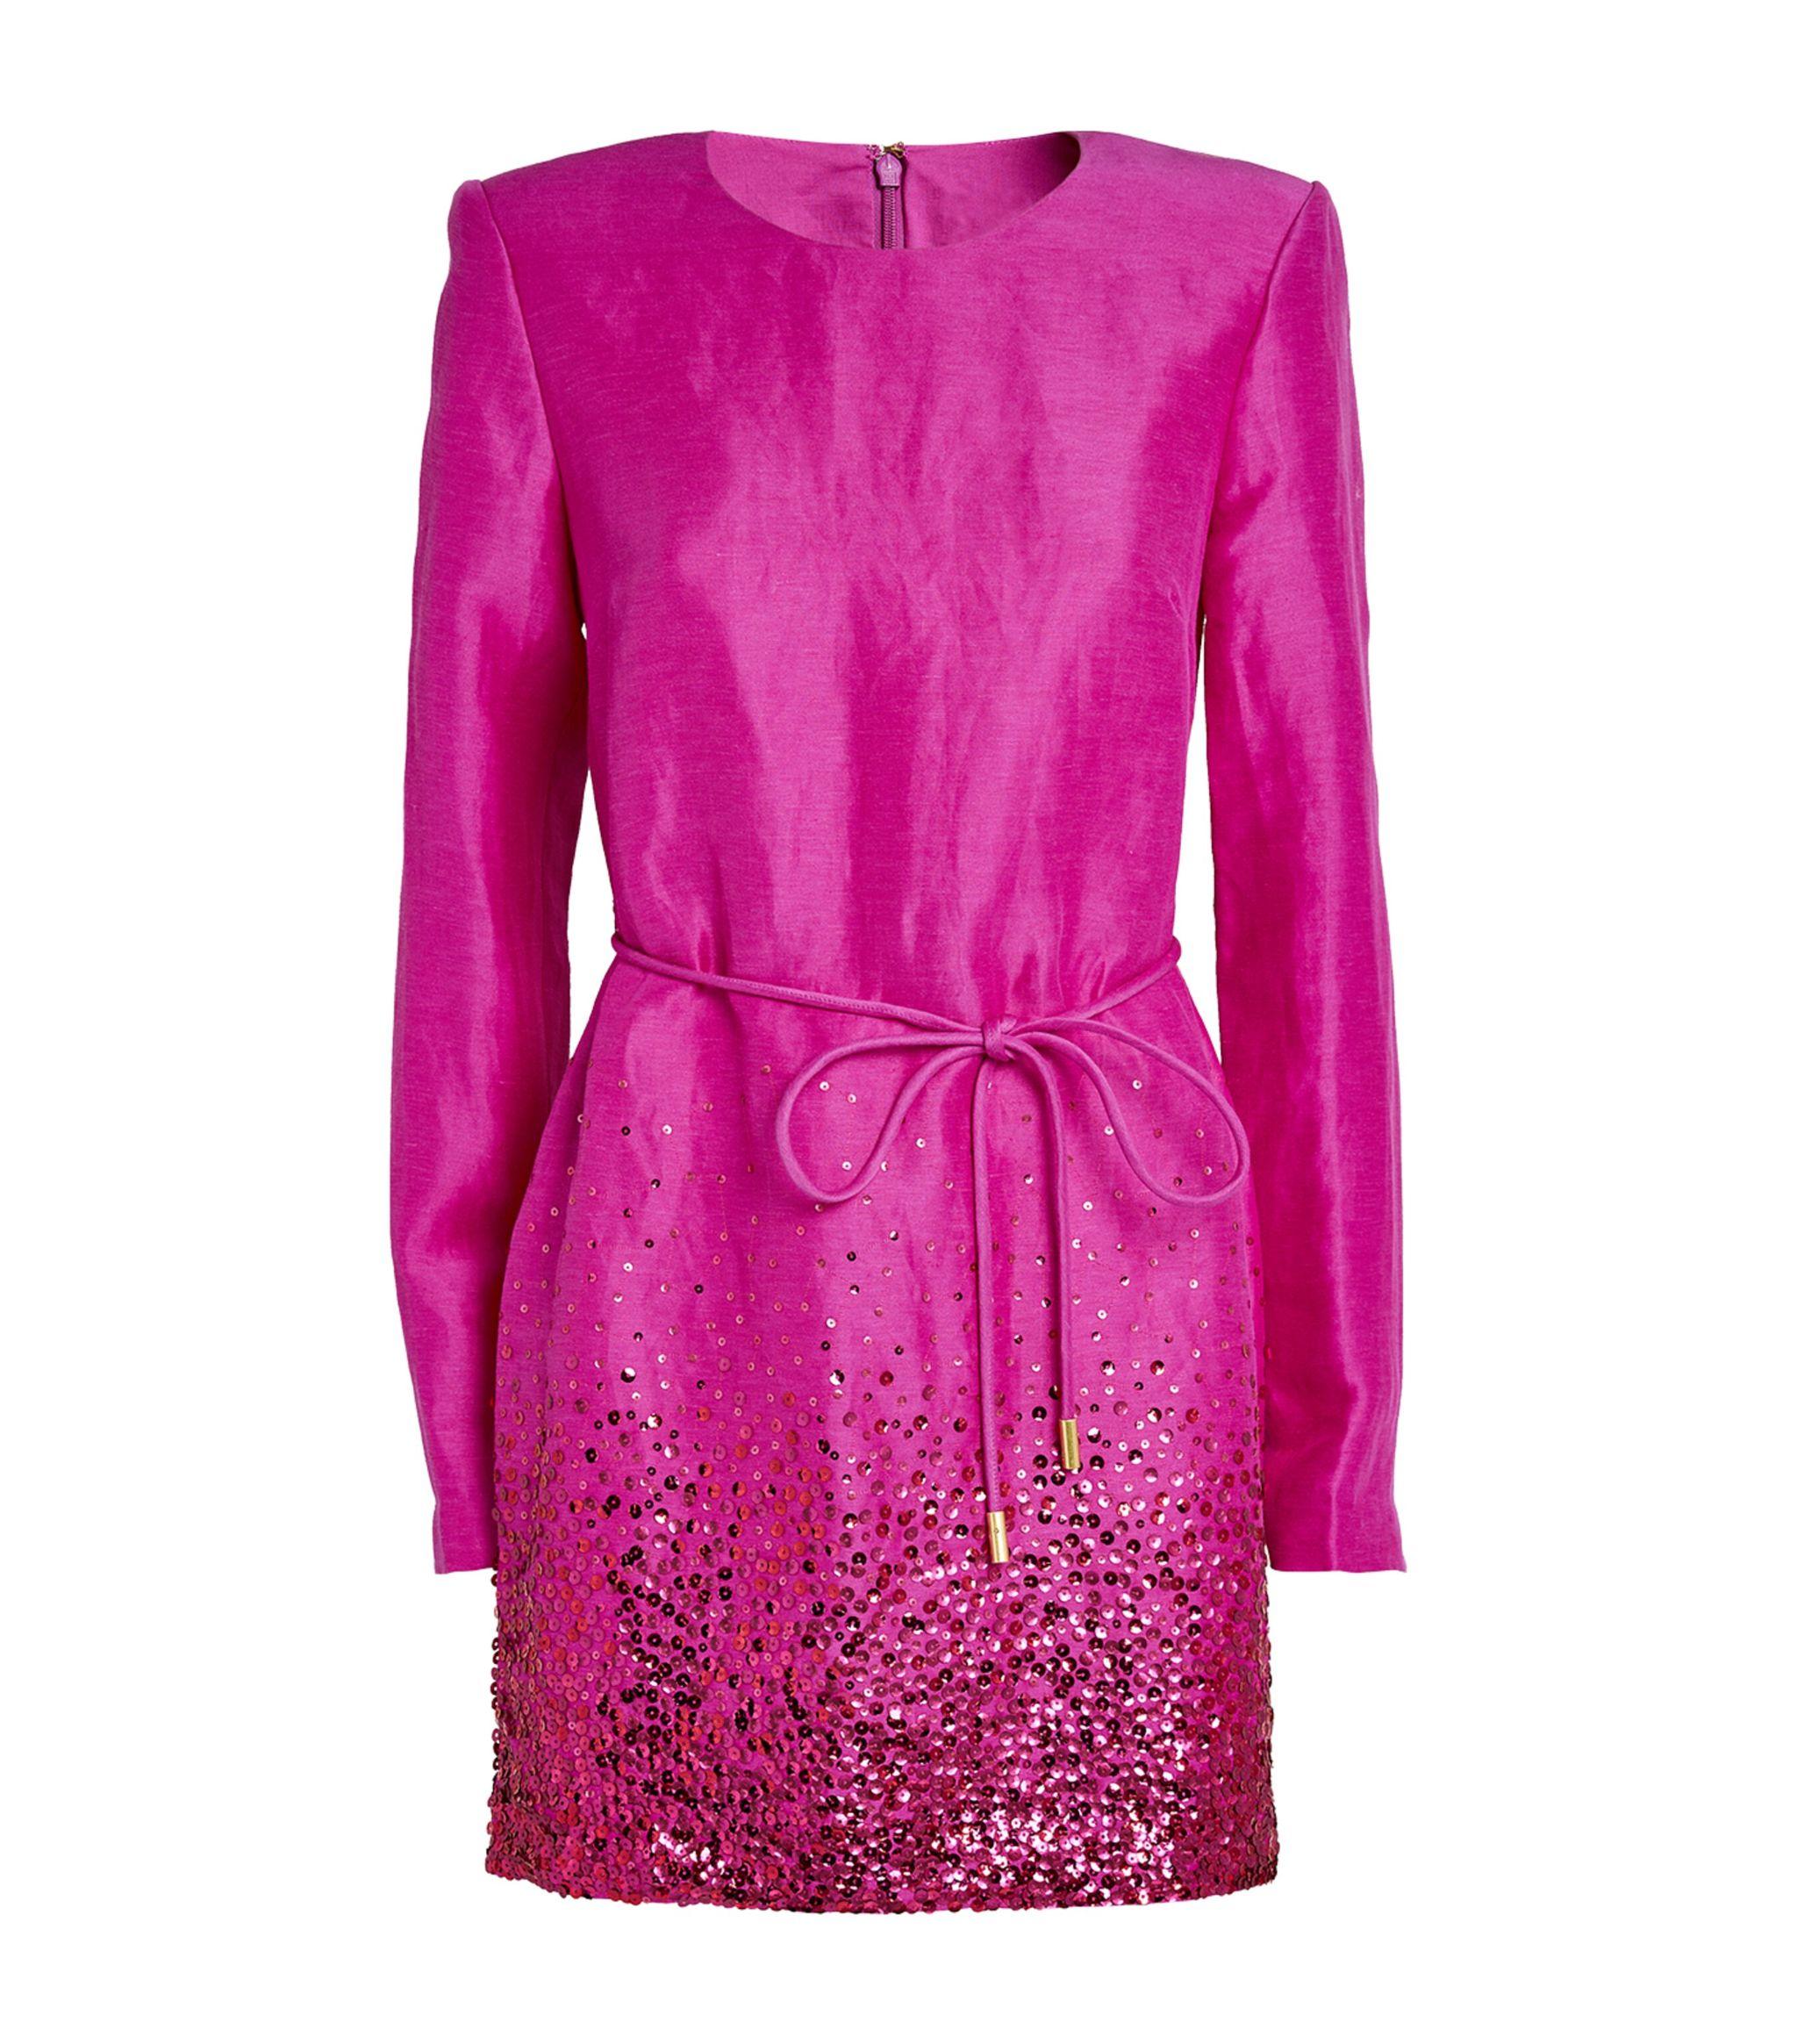 Aje. Embellished Reflection Mini Dress in Pink | Lyst